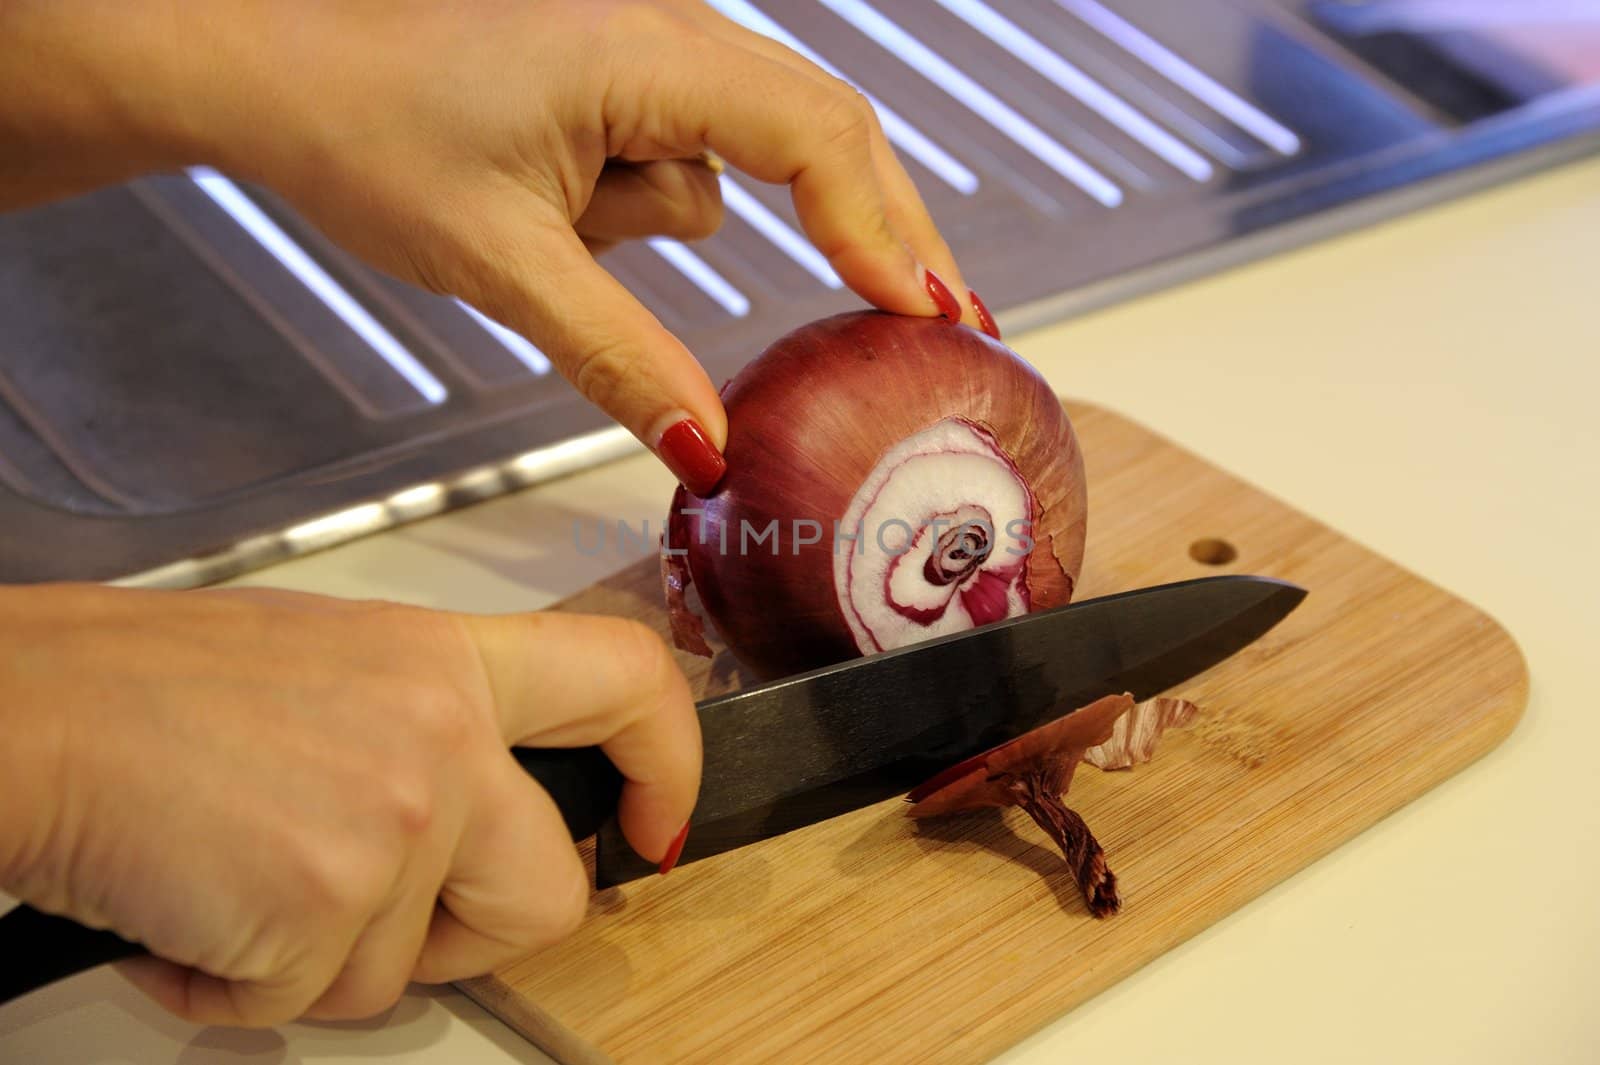 The hands cutting onions on a chopping board by mizio1970